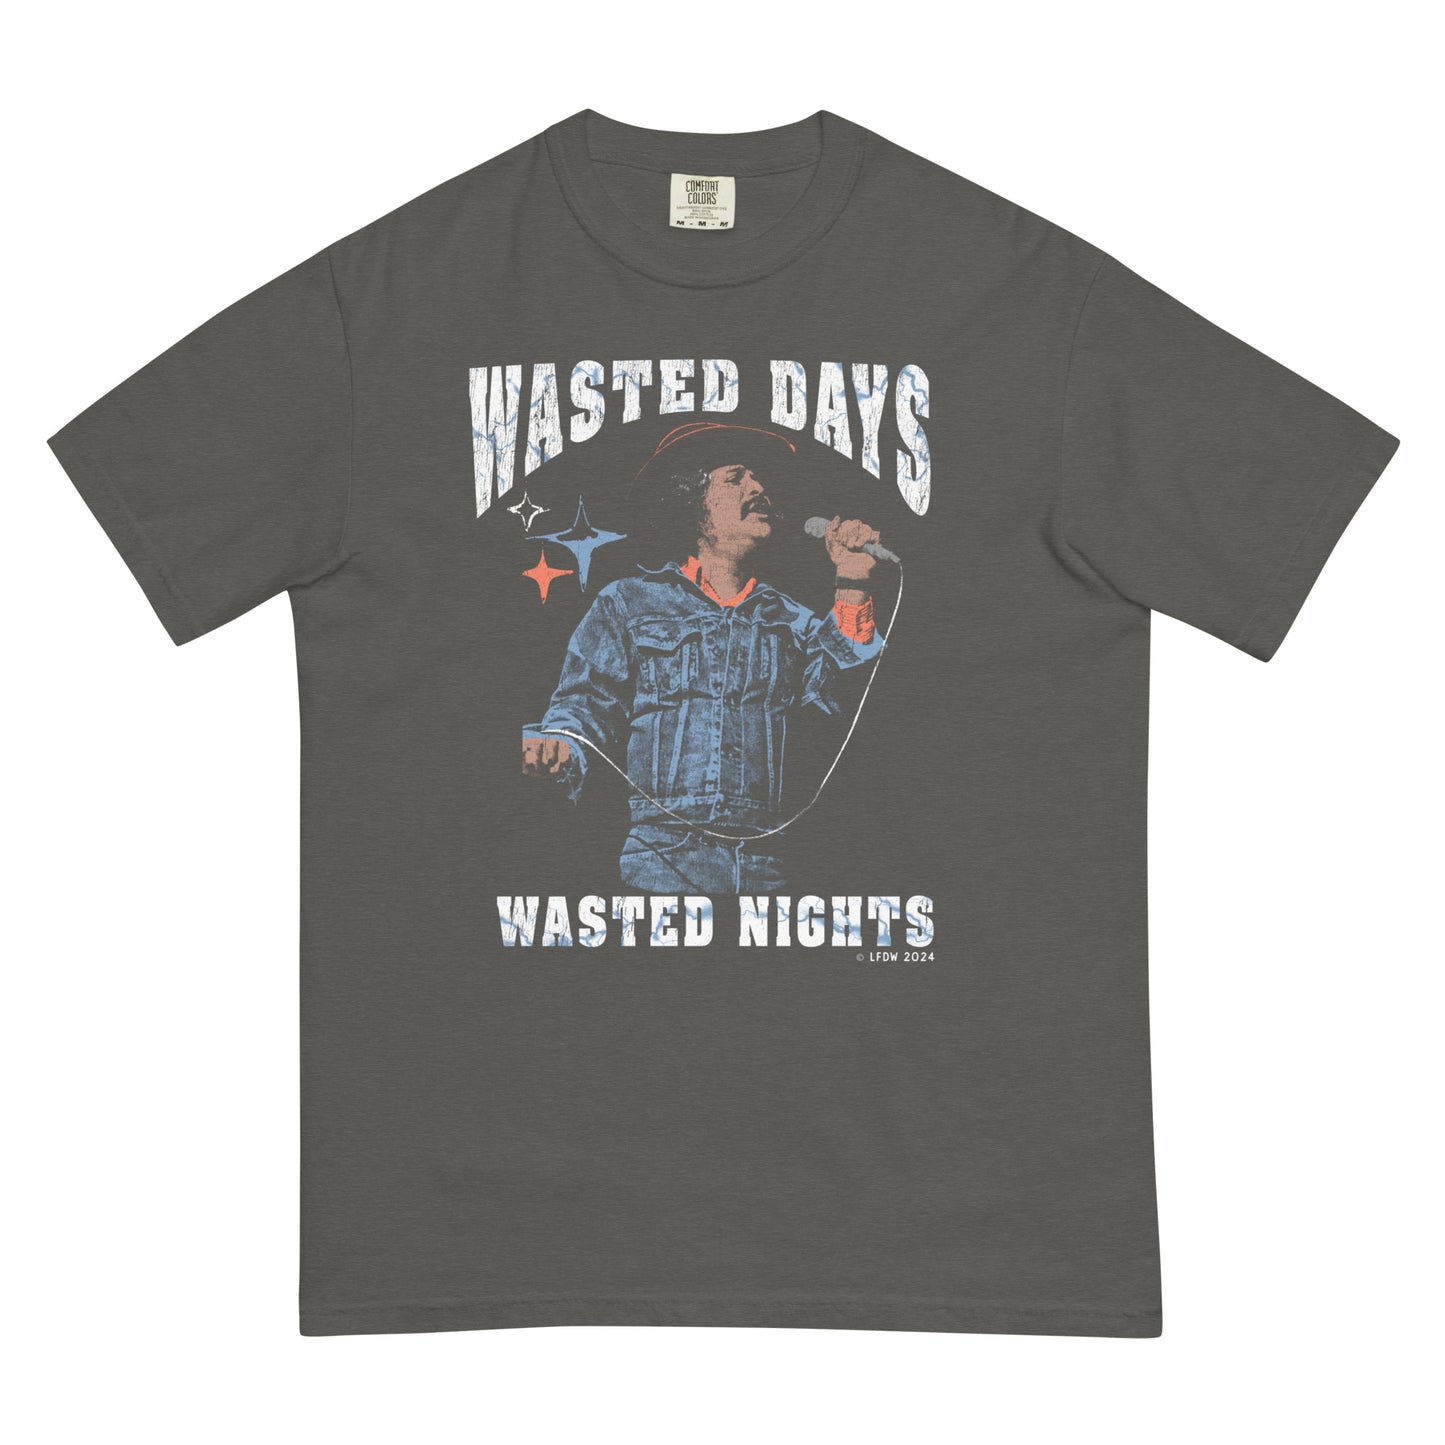 Wasted Days & Wasted Nights T-Shirt